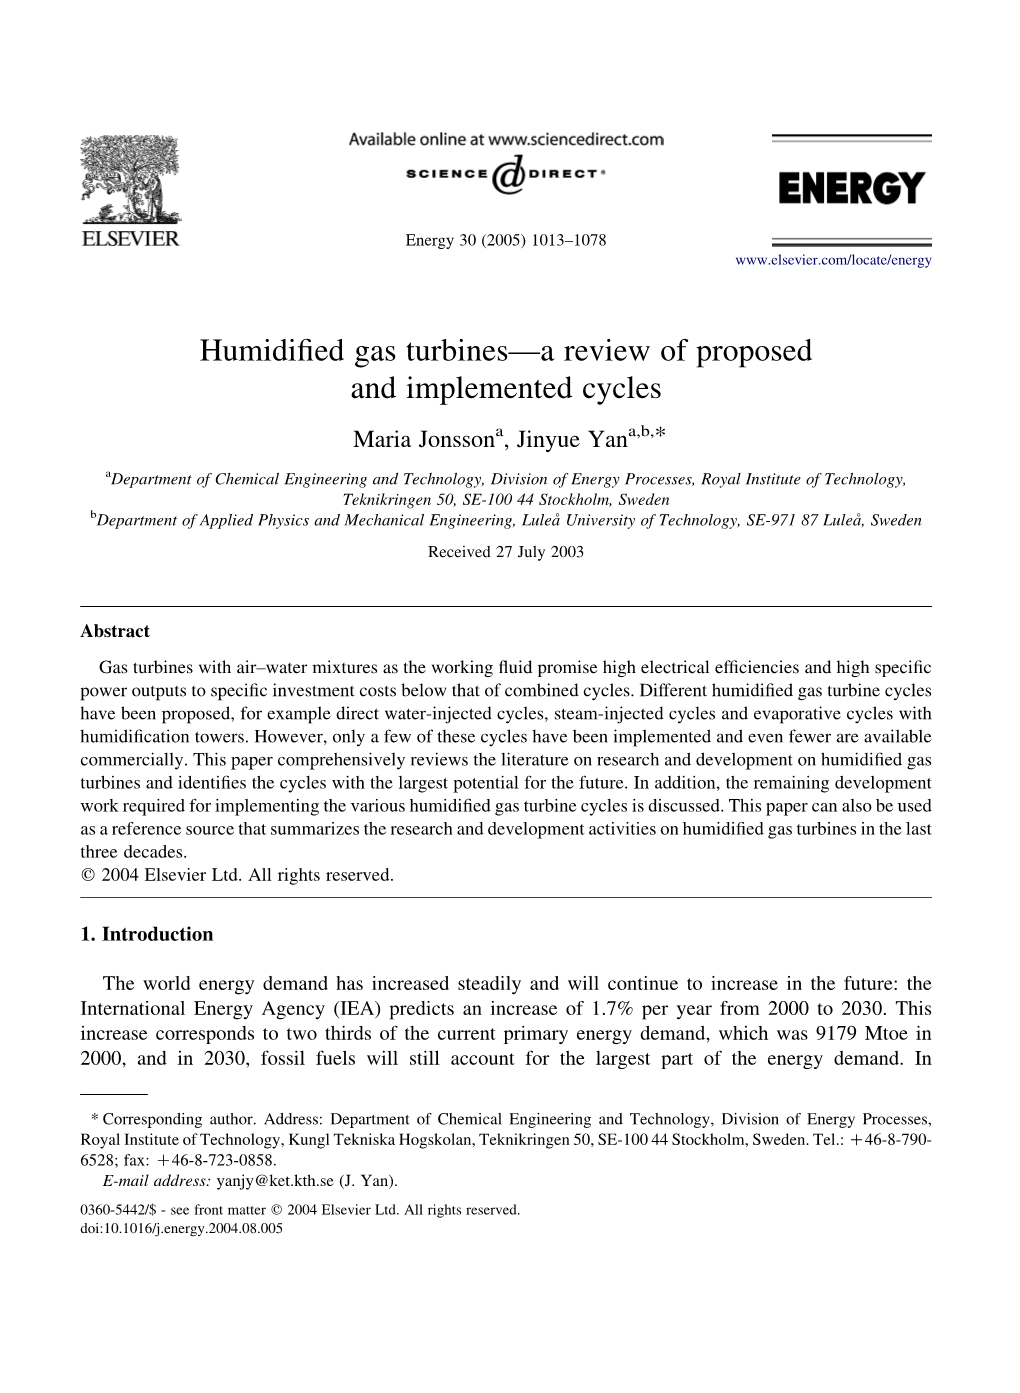 Humidified Gas Turbines—A Review of Proposed and Implemented Cycles